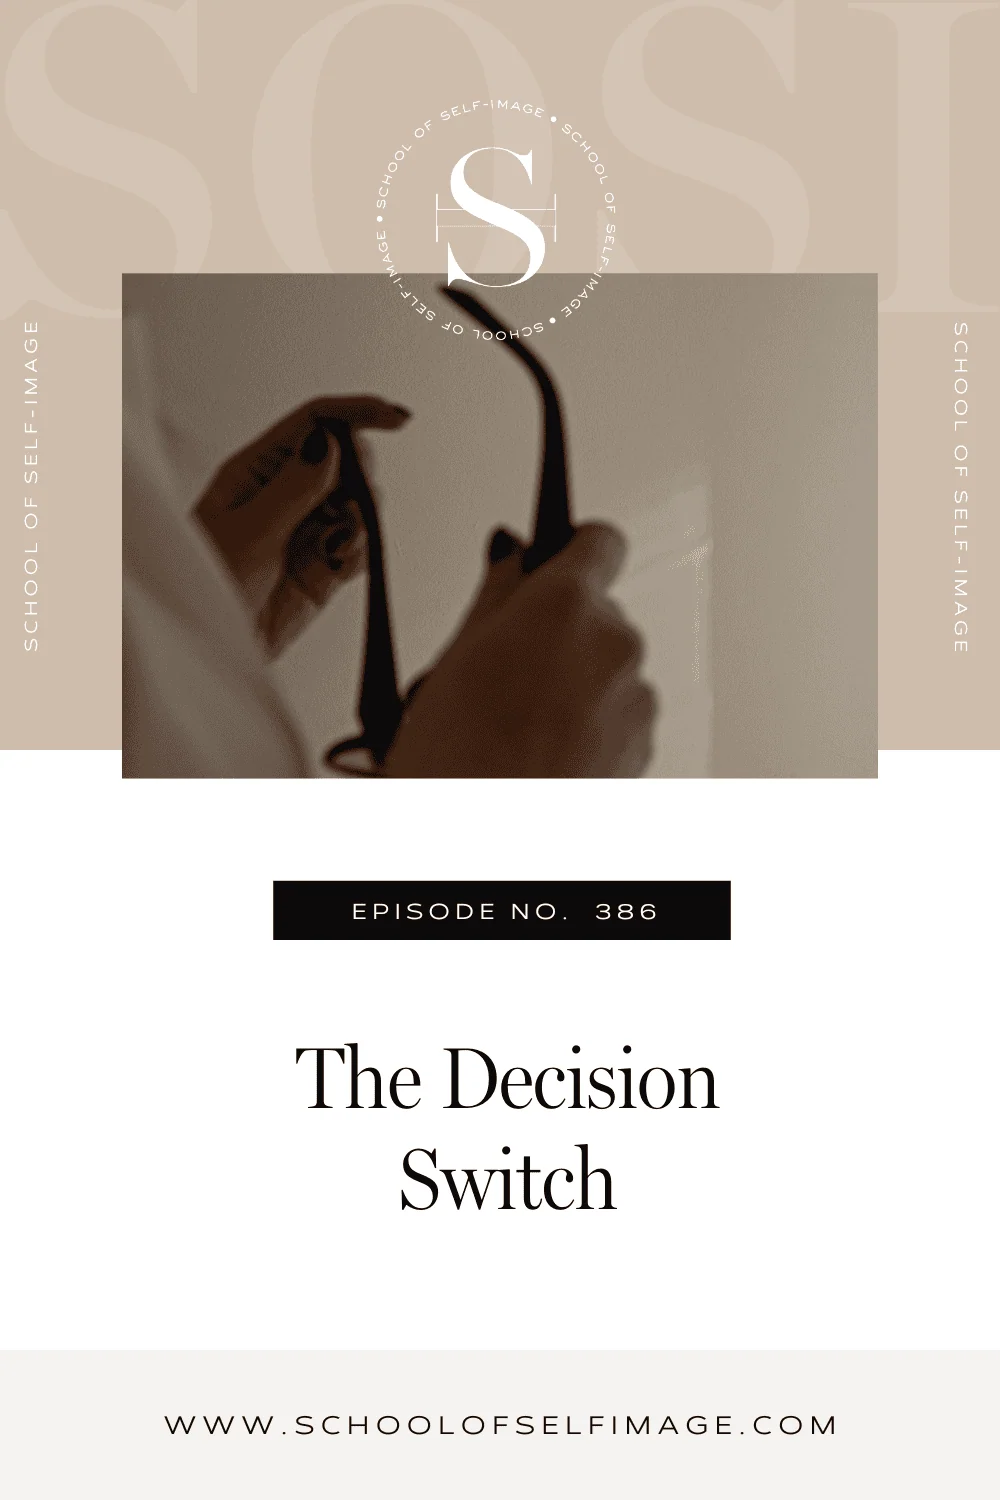 The Decision Switch